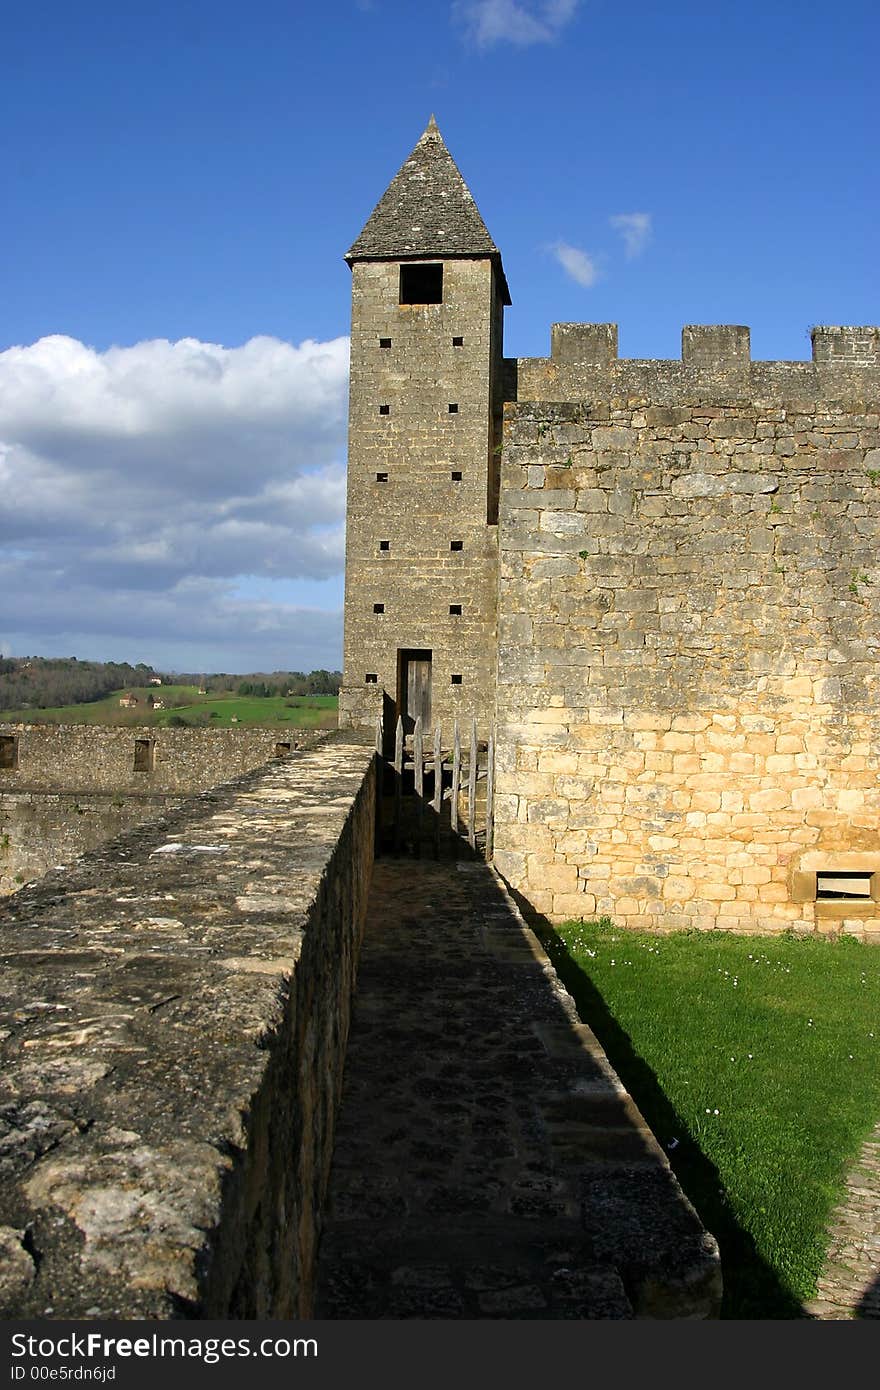 Photo of a tower at Beynac Castle in Perigord, France. Photo of a tower at Beynac Castle in Perigord, France